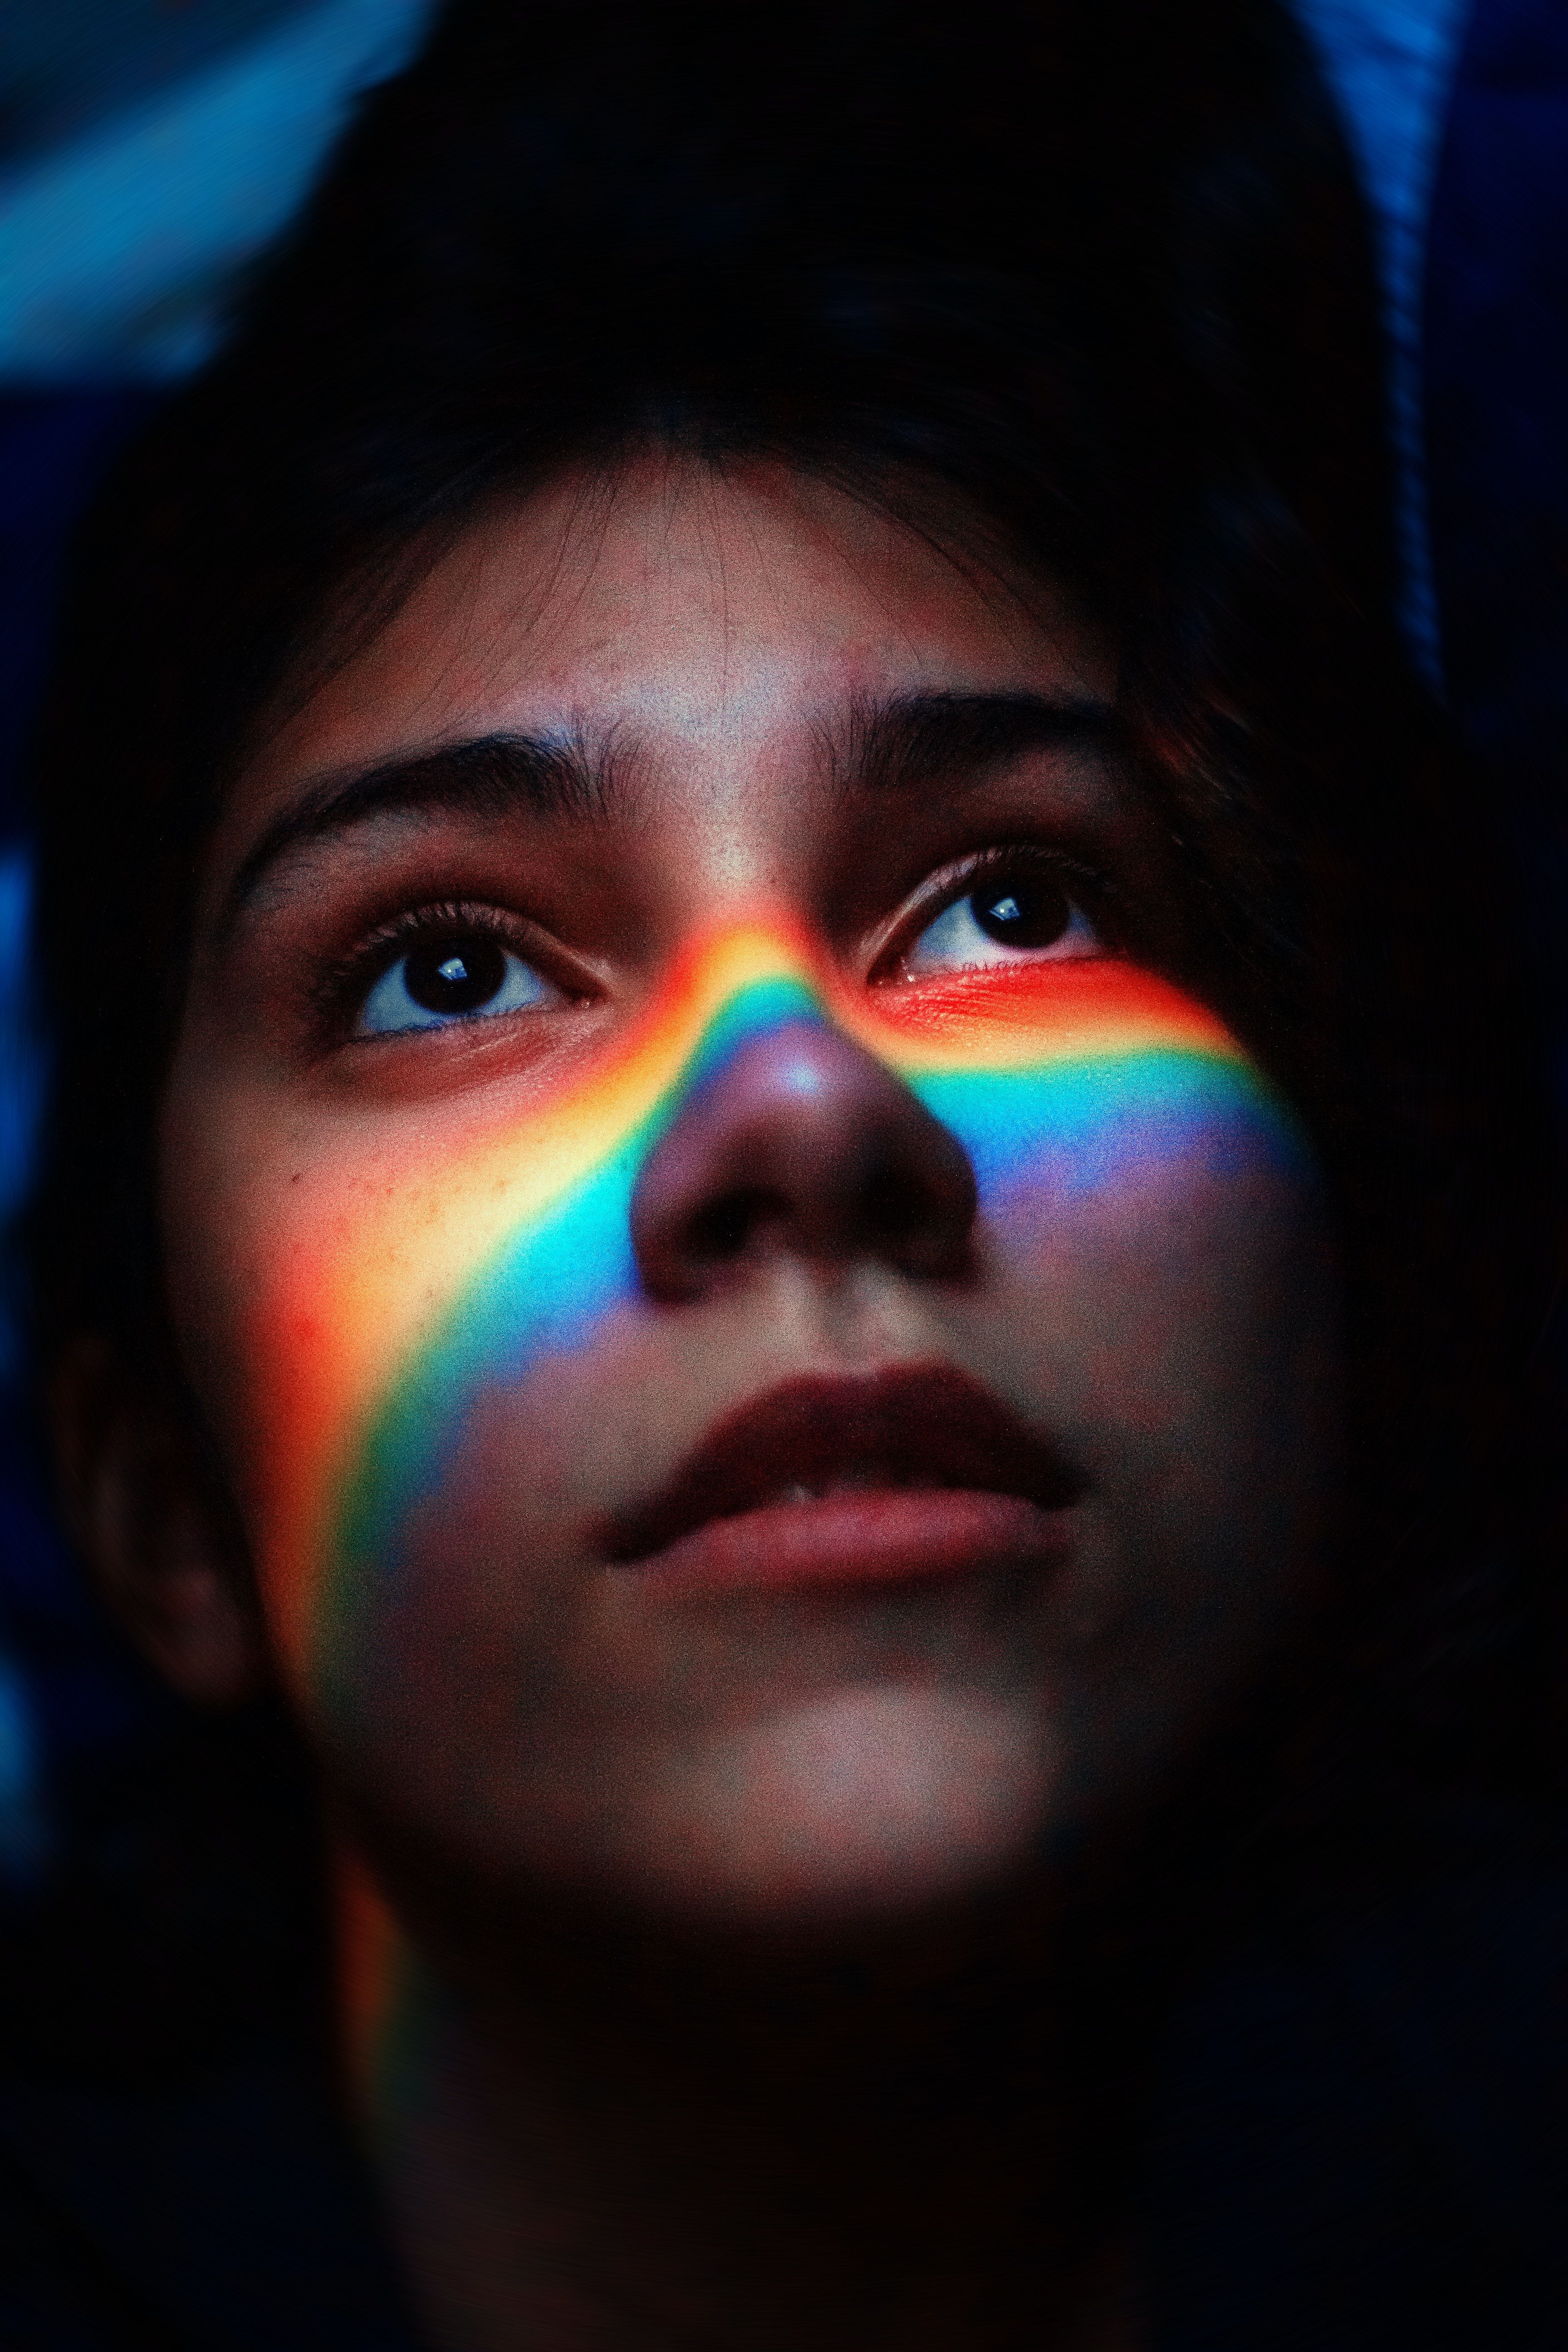 Woman With Rainbow Light Reflecting Her Face · Free